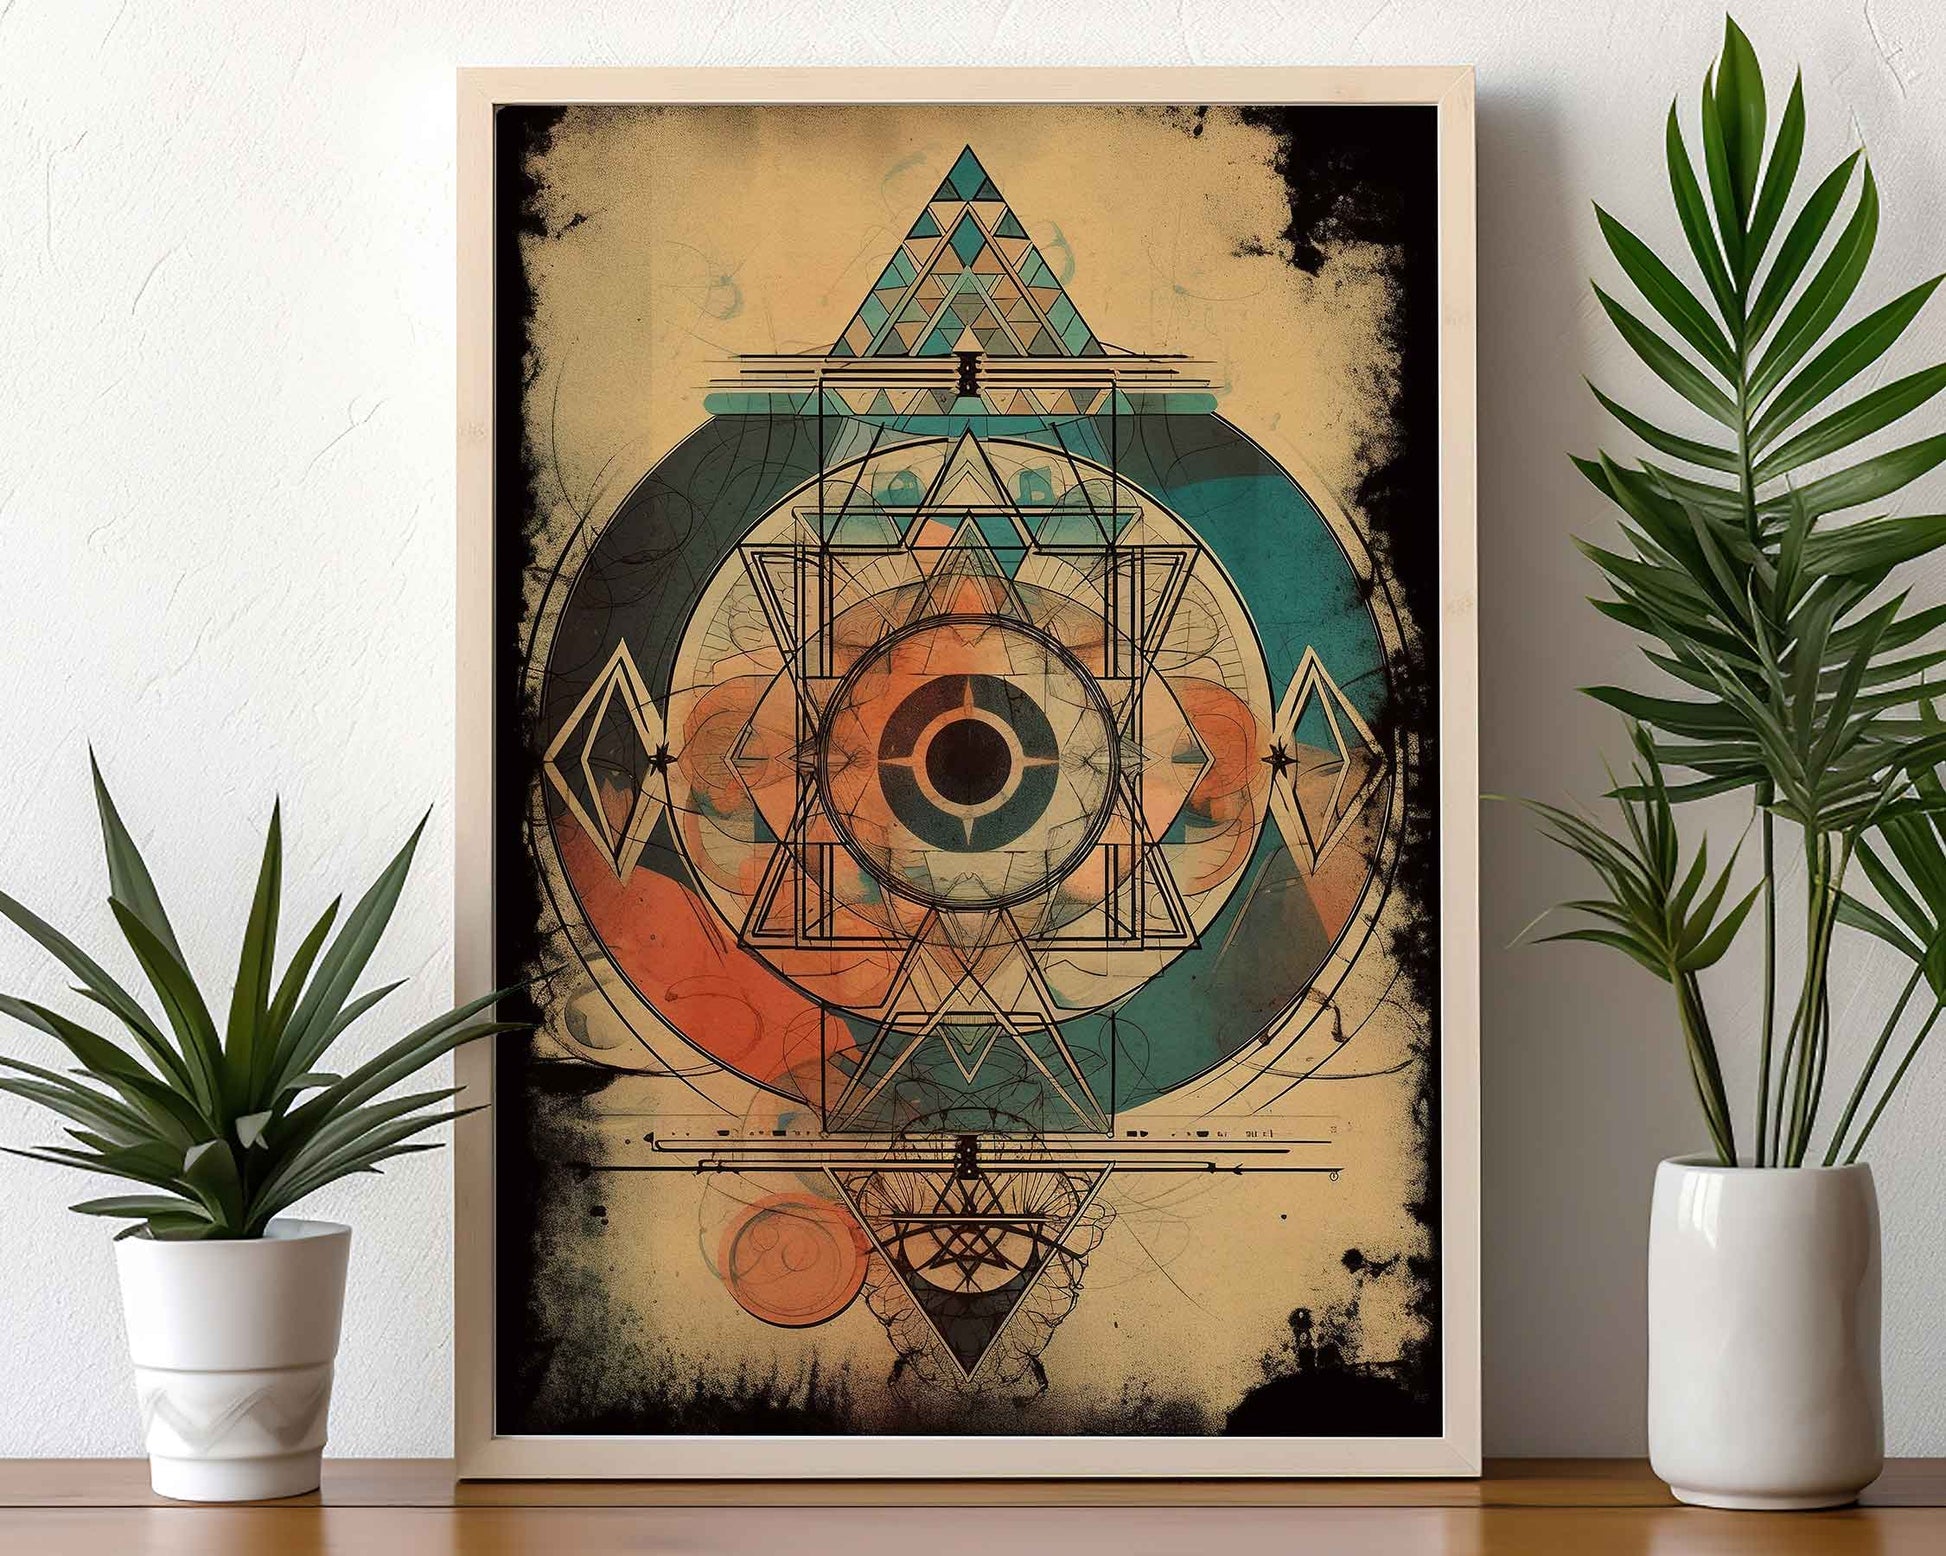 Framed Image of Boho Aztec Geometric Abstract Tribal Style Wall Art Poster Prints